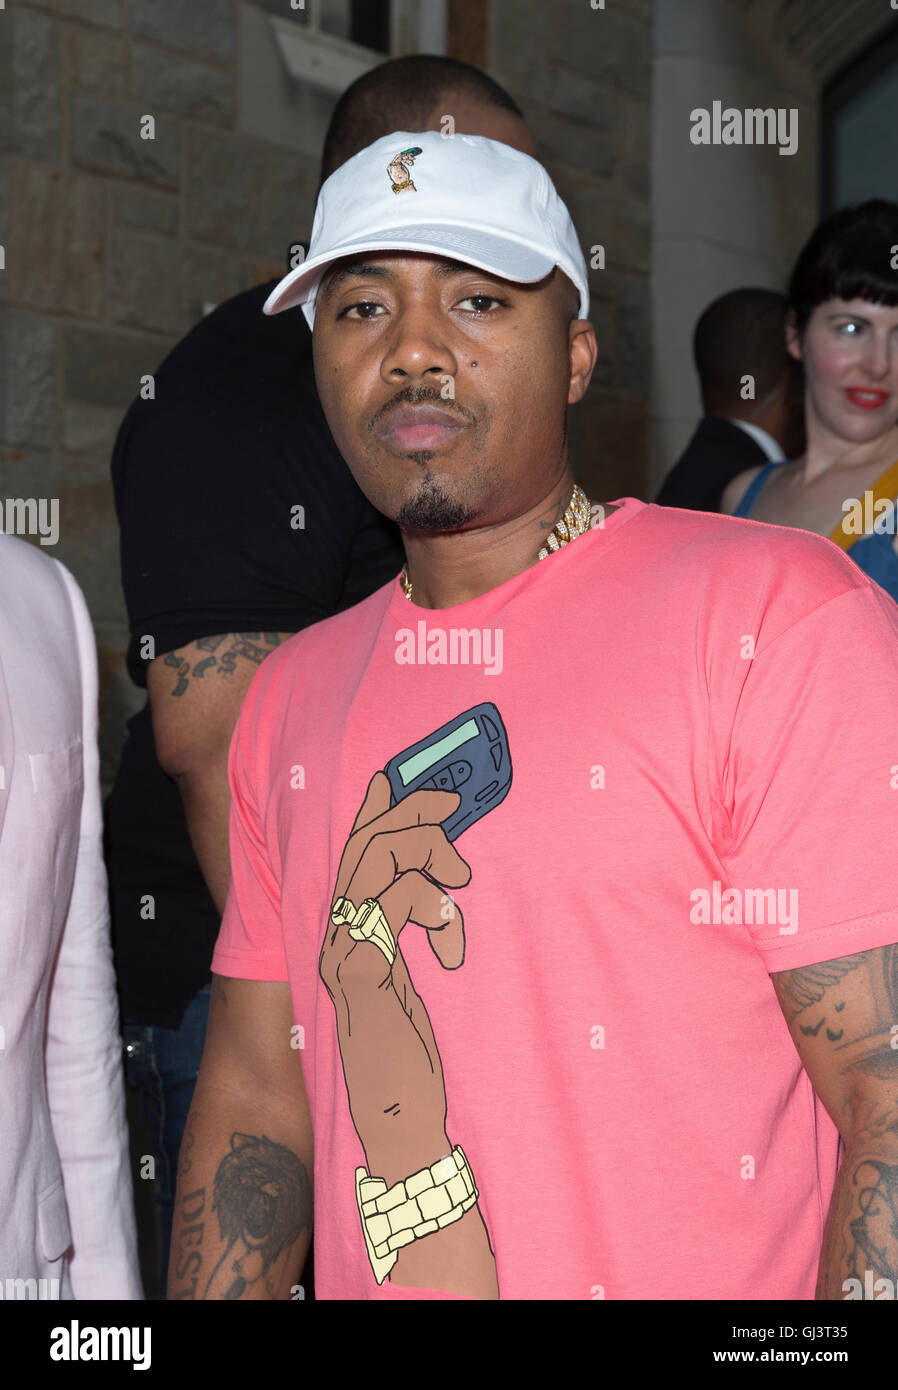 New York, United States. 11th Aug, 2016. Nas attends The Get Down Netflix original series premier at Lehman Center for performing arts in the Bronx. Credit:  Lev Radin/Pacific Press/Alamy Live News Stock Photo